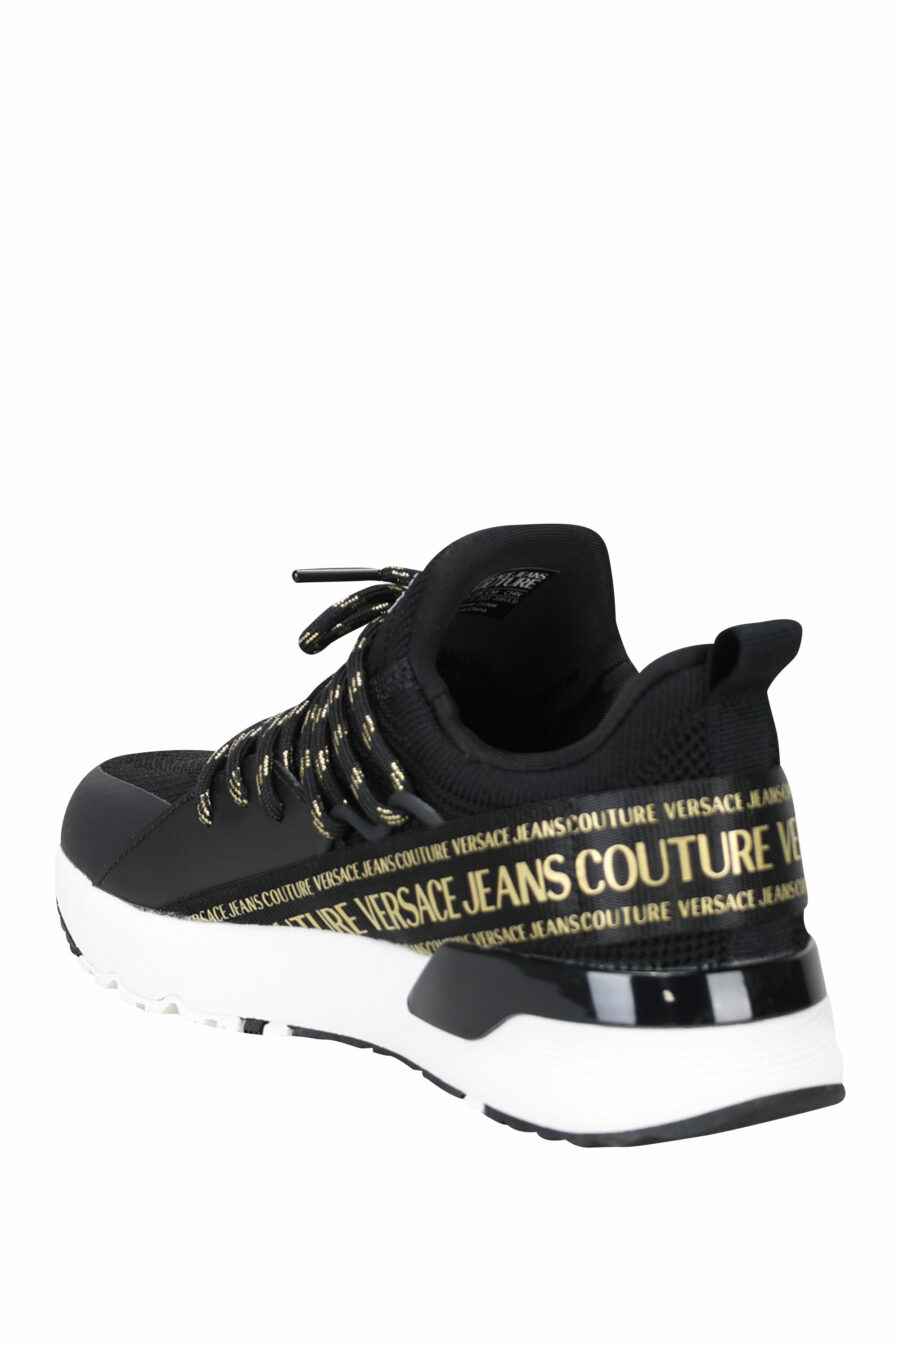 Black "troadlop" trainers with gold ribbon logo - 8052019454222 3